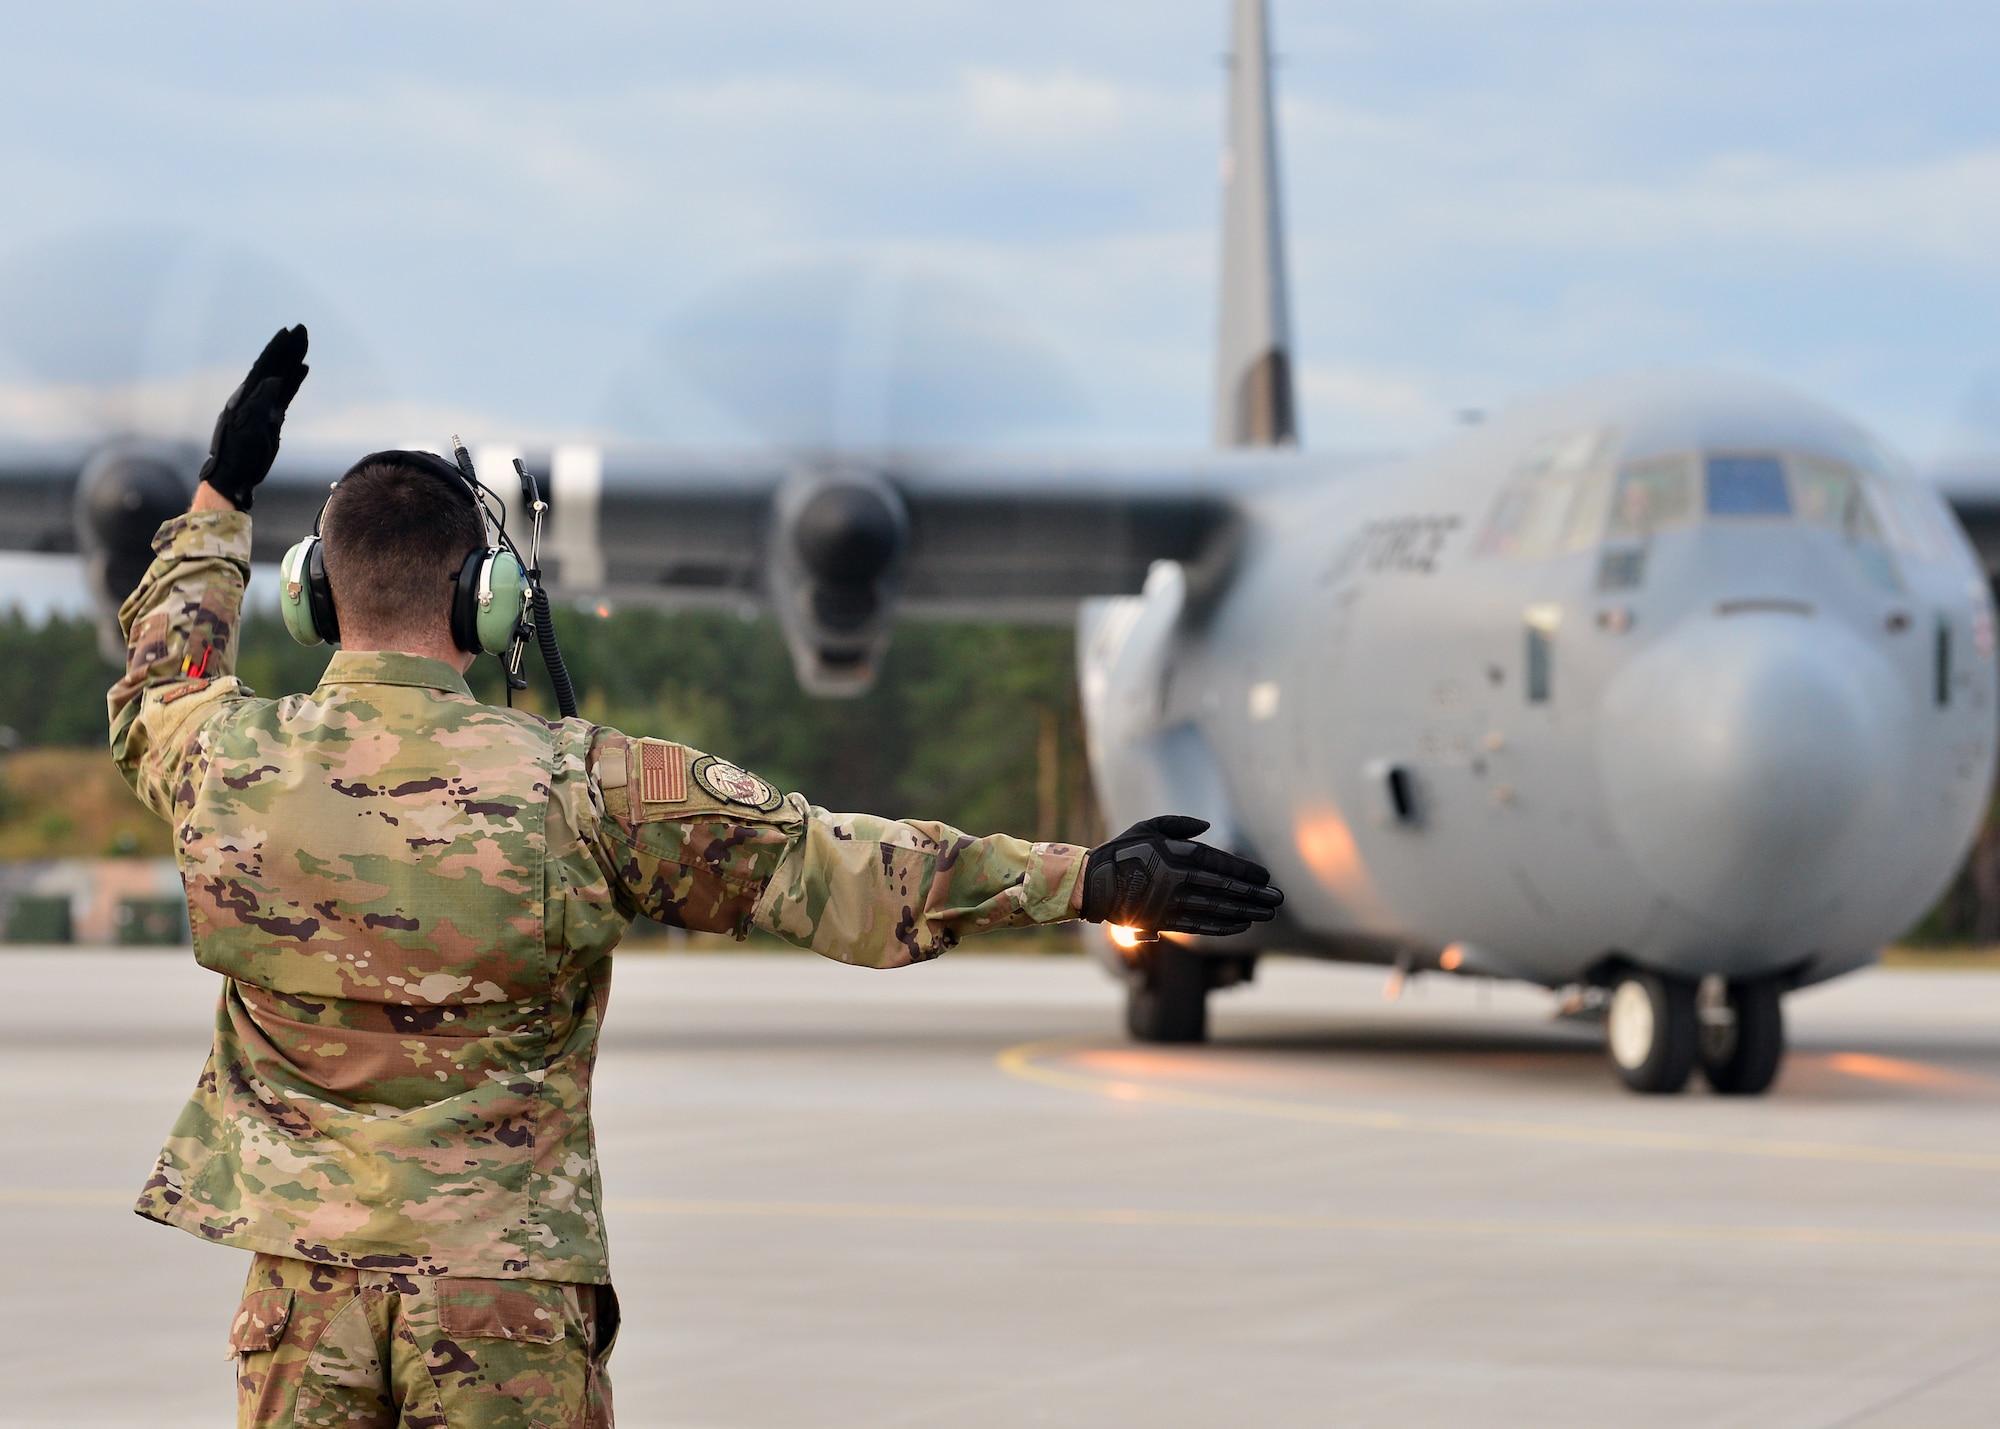 An Airman deployed with the 37th Airlift Squadron marshals a C-130J Super Hercules at Powidz Air Base, Poland, July 10, 2019. Approximately 80 Airmen and three aircraft deployed to Powidz Air Base in support of Aviation Rotation 19-3, a bilateral training exercise between the U.S. and Polish air forces. (U.S. Air Force photo by Staff Sgt. Jimmie D. Pike)